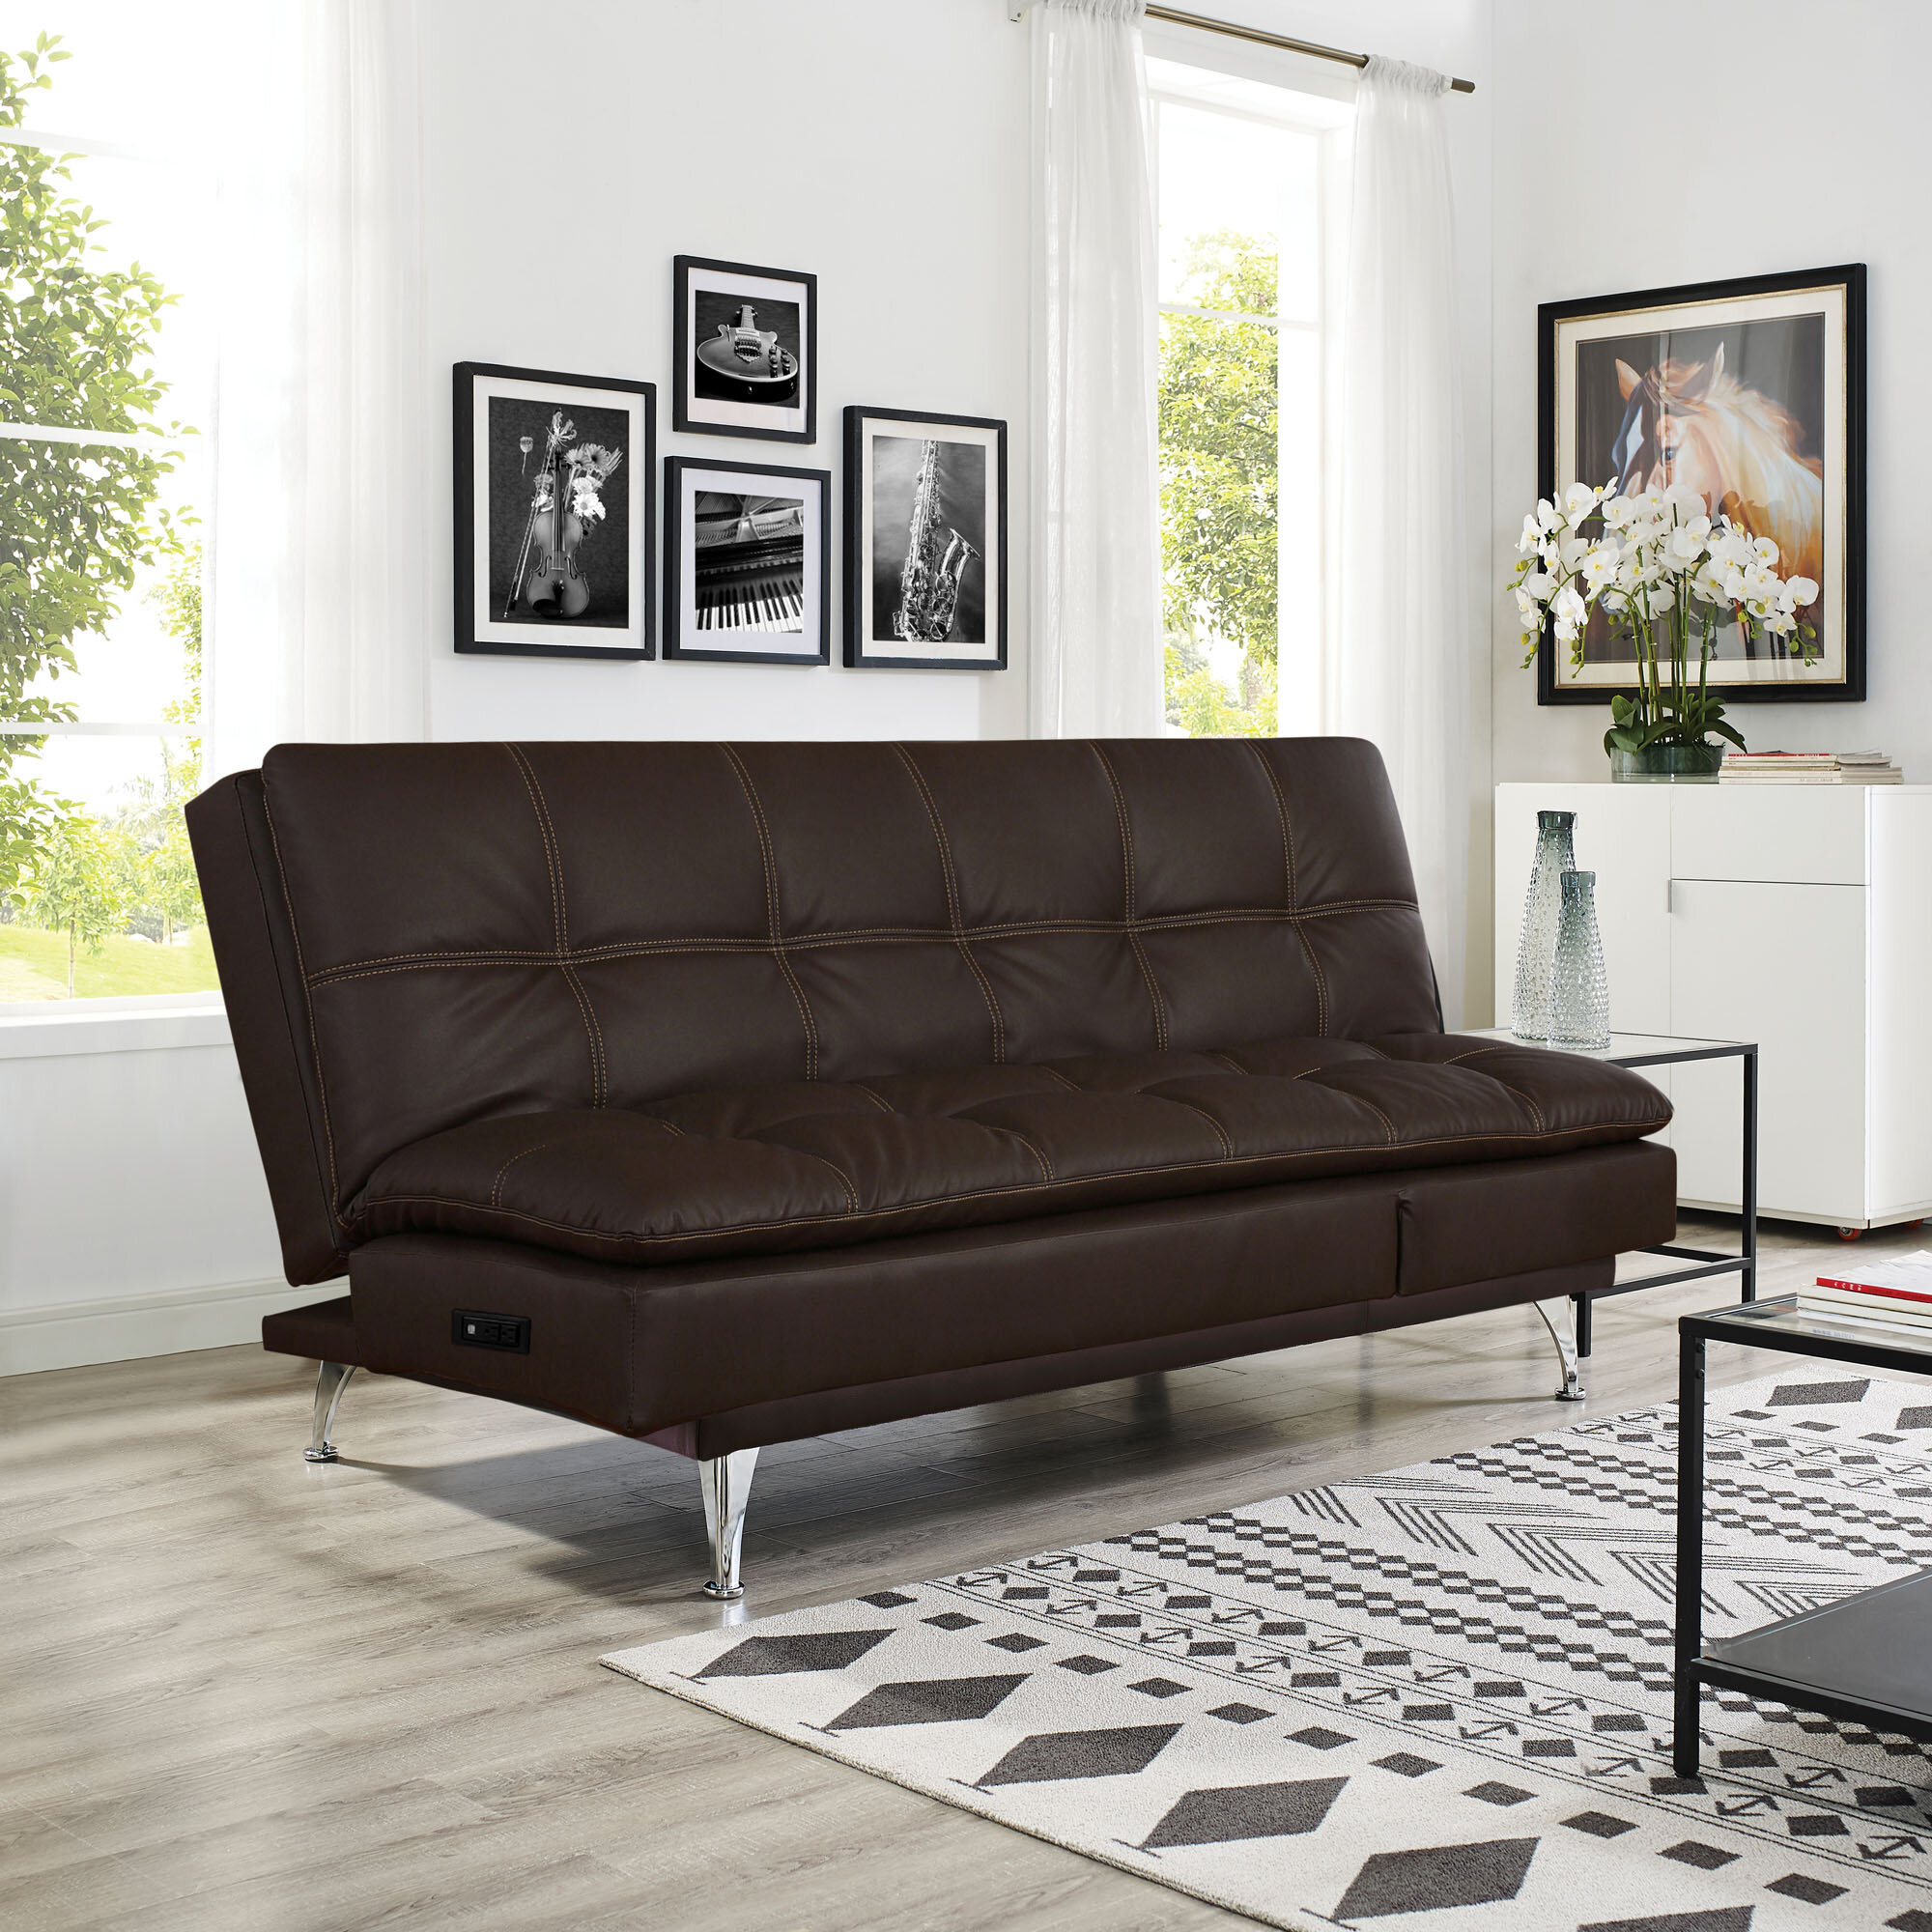 Tufted Convertible Faux Leather FUTON SOFA BED Full Size Sleeper COUCH Brown 